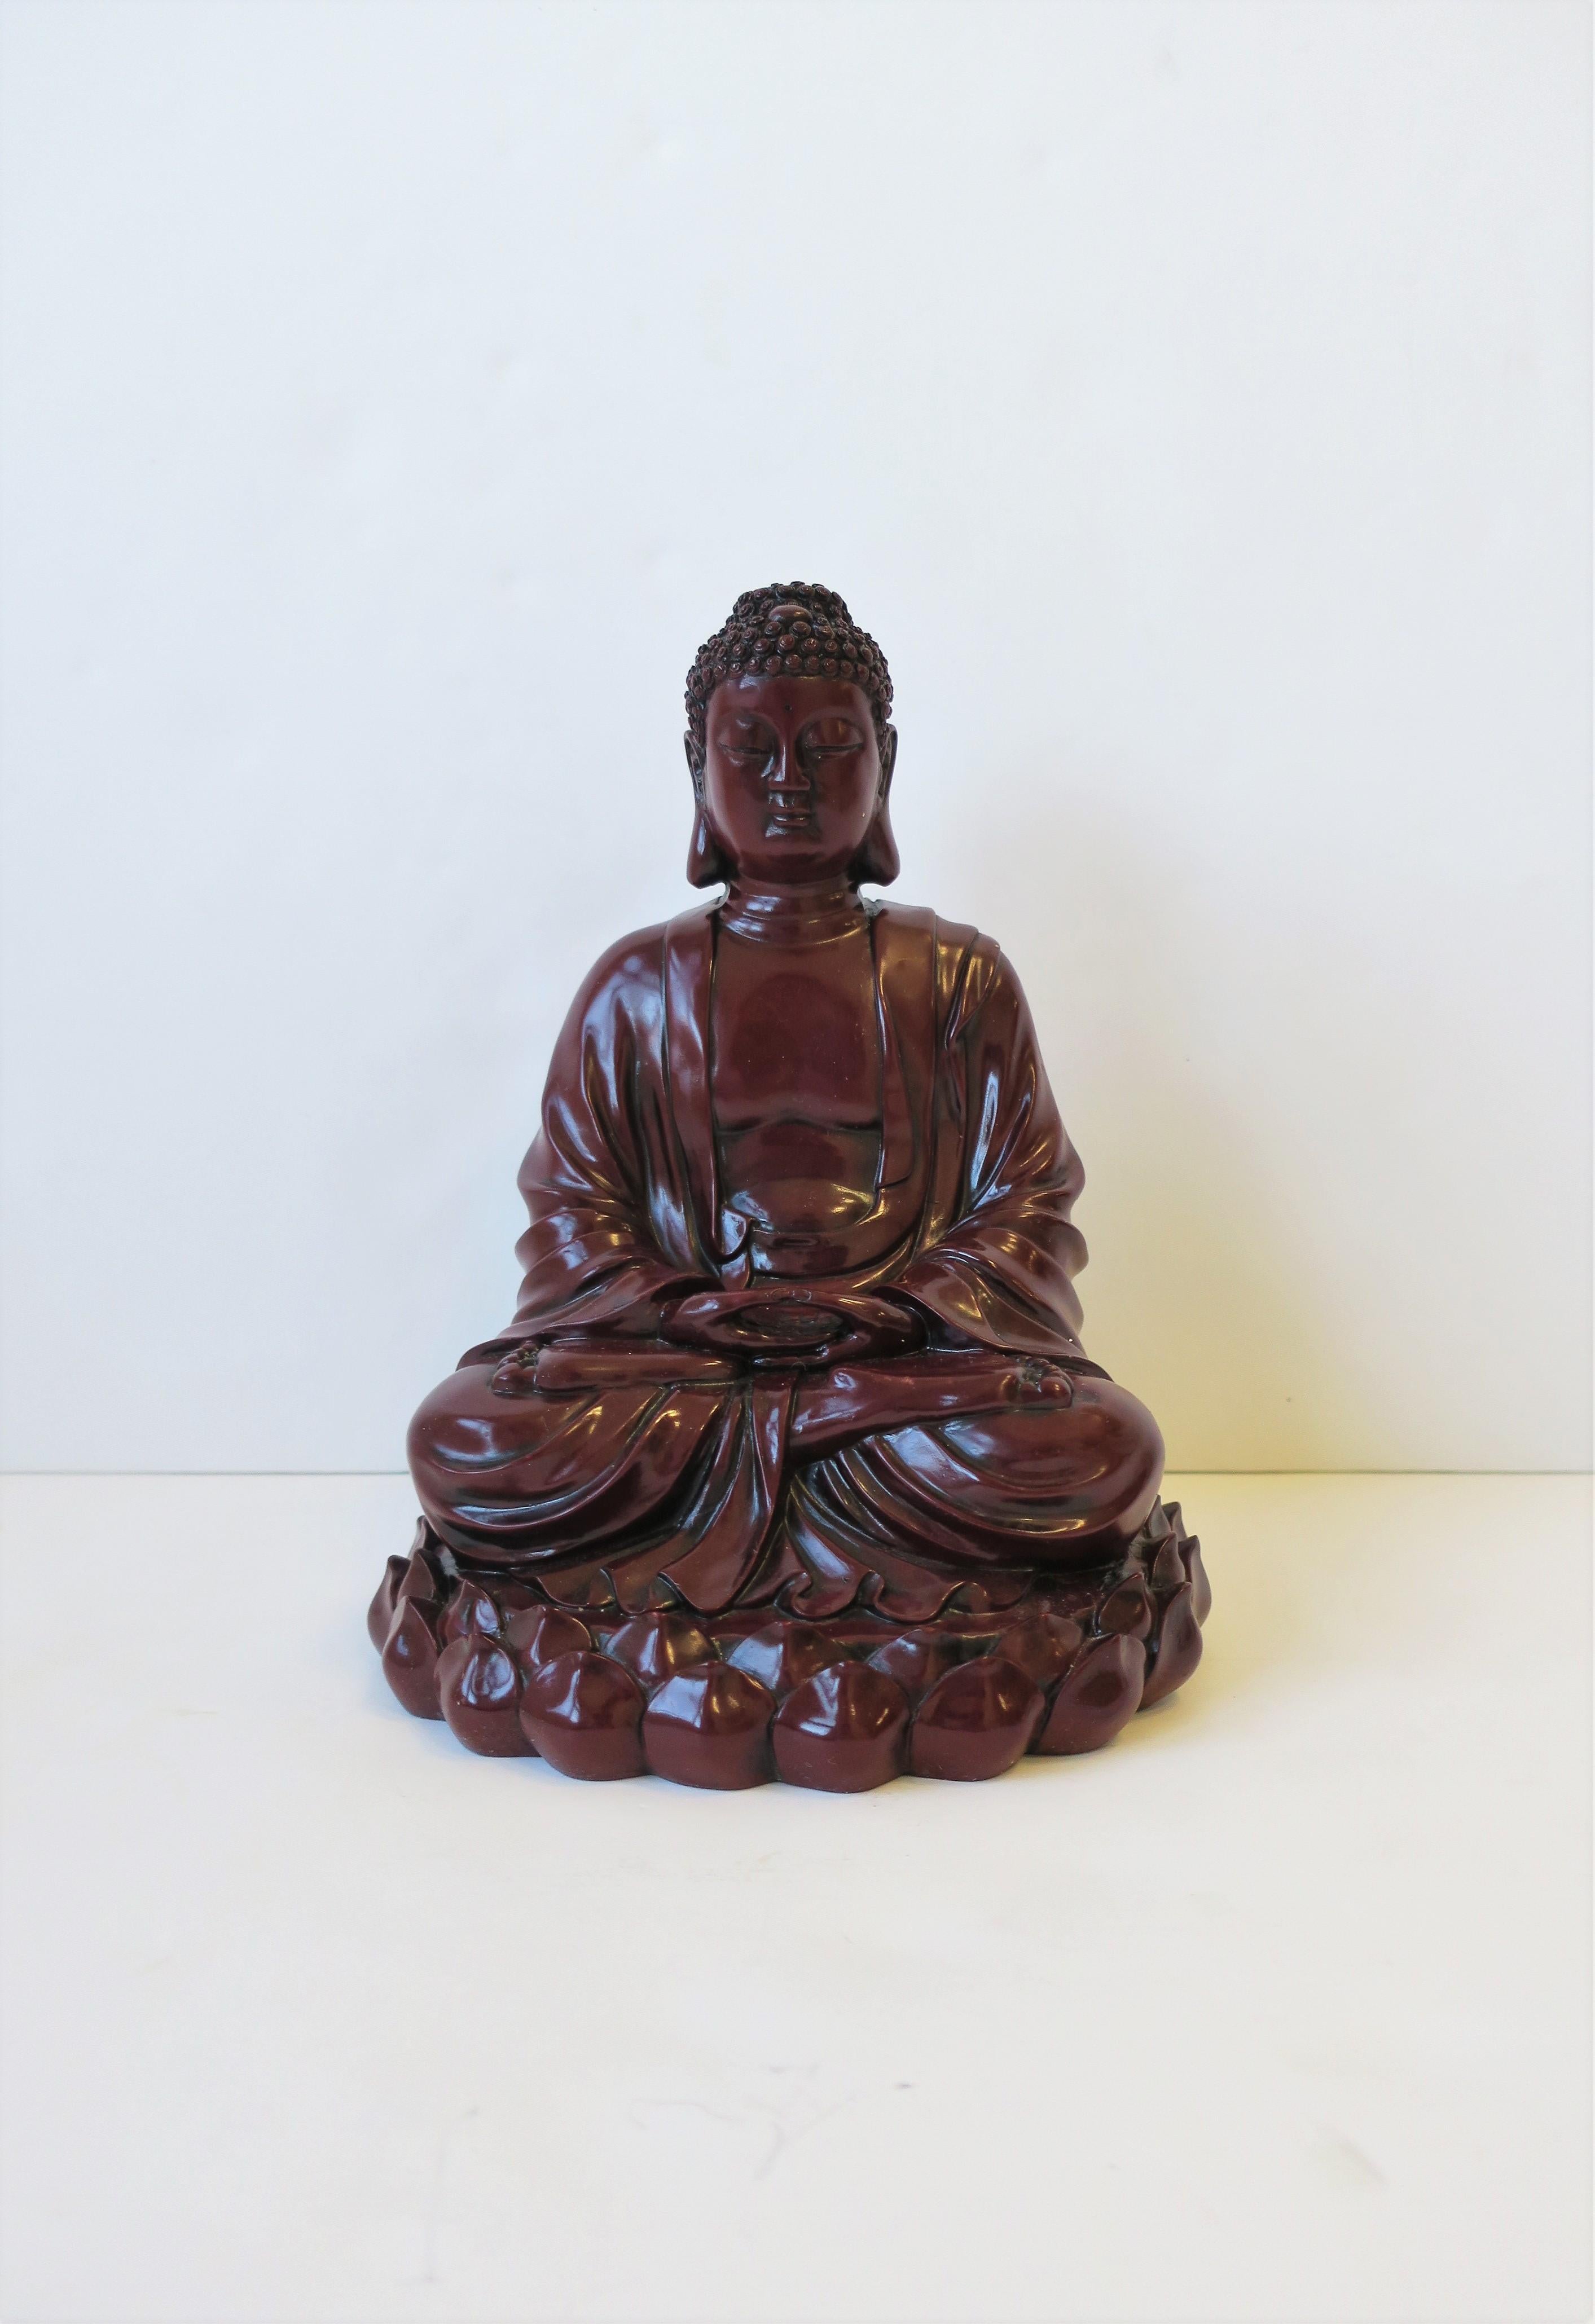 A substantial dark red burgundy resin sitting Buddha statue decorative object, circa late-20th century. This Buddha is relatively large wearing a robe in sitting meditating position with a lotus leaf design around base. Dimensions: 8